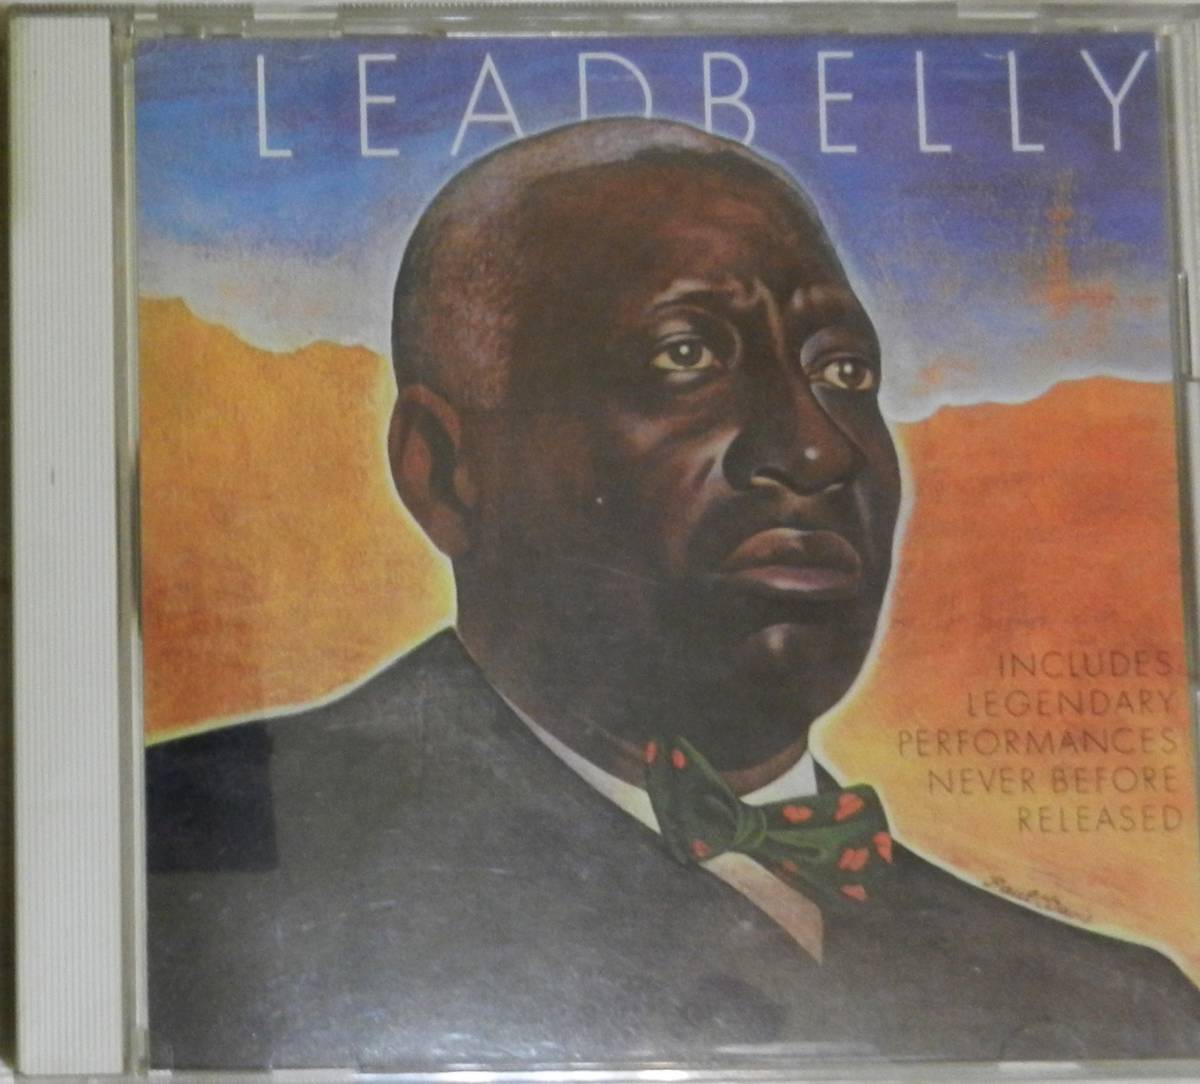 【CD】LEADBELLY / Includes Legendary Performances Never Before Released ☆ レッドベリー_画像1